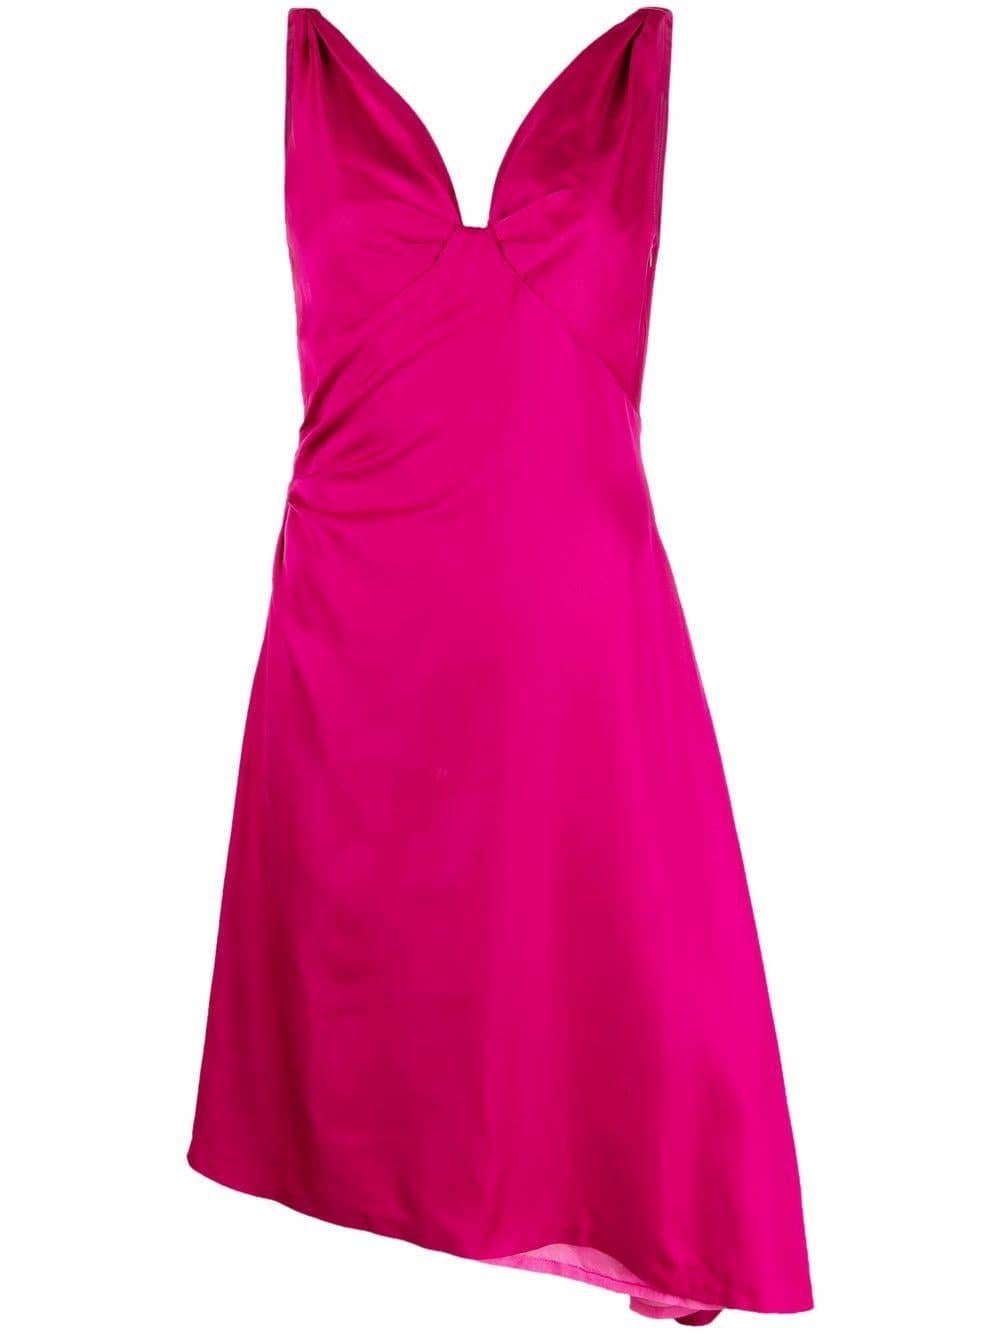 1980s Pink draped cocktail Thierry Mugler Couture dress featuring a knot detailing, an asymmetric hem, flared skirt, concealed side zip fastening.
In good vintage condition. Made in France.
Estimated size 36fr/ US4/ UK8
Polyamide 74%, Silk 26%
We